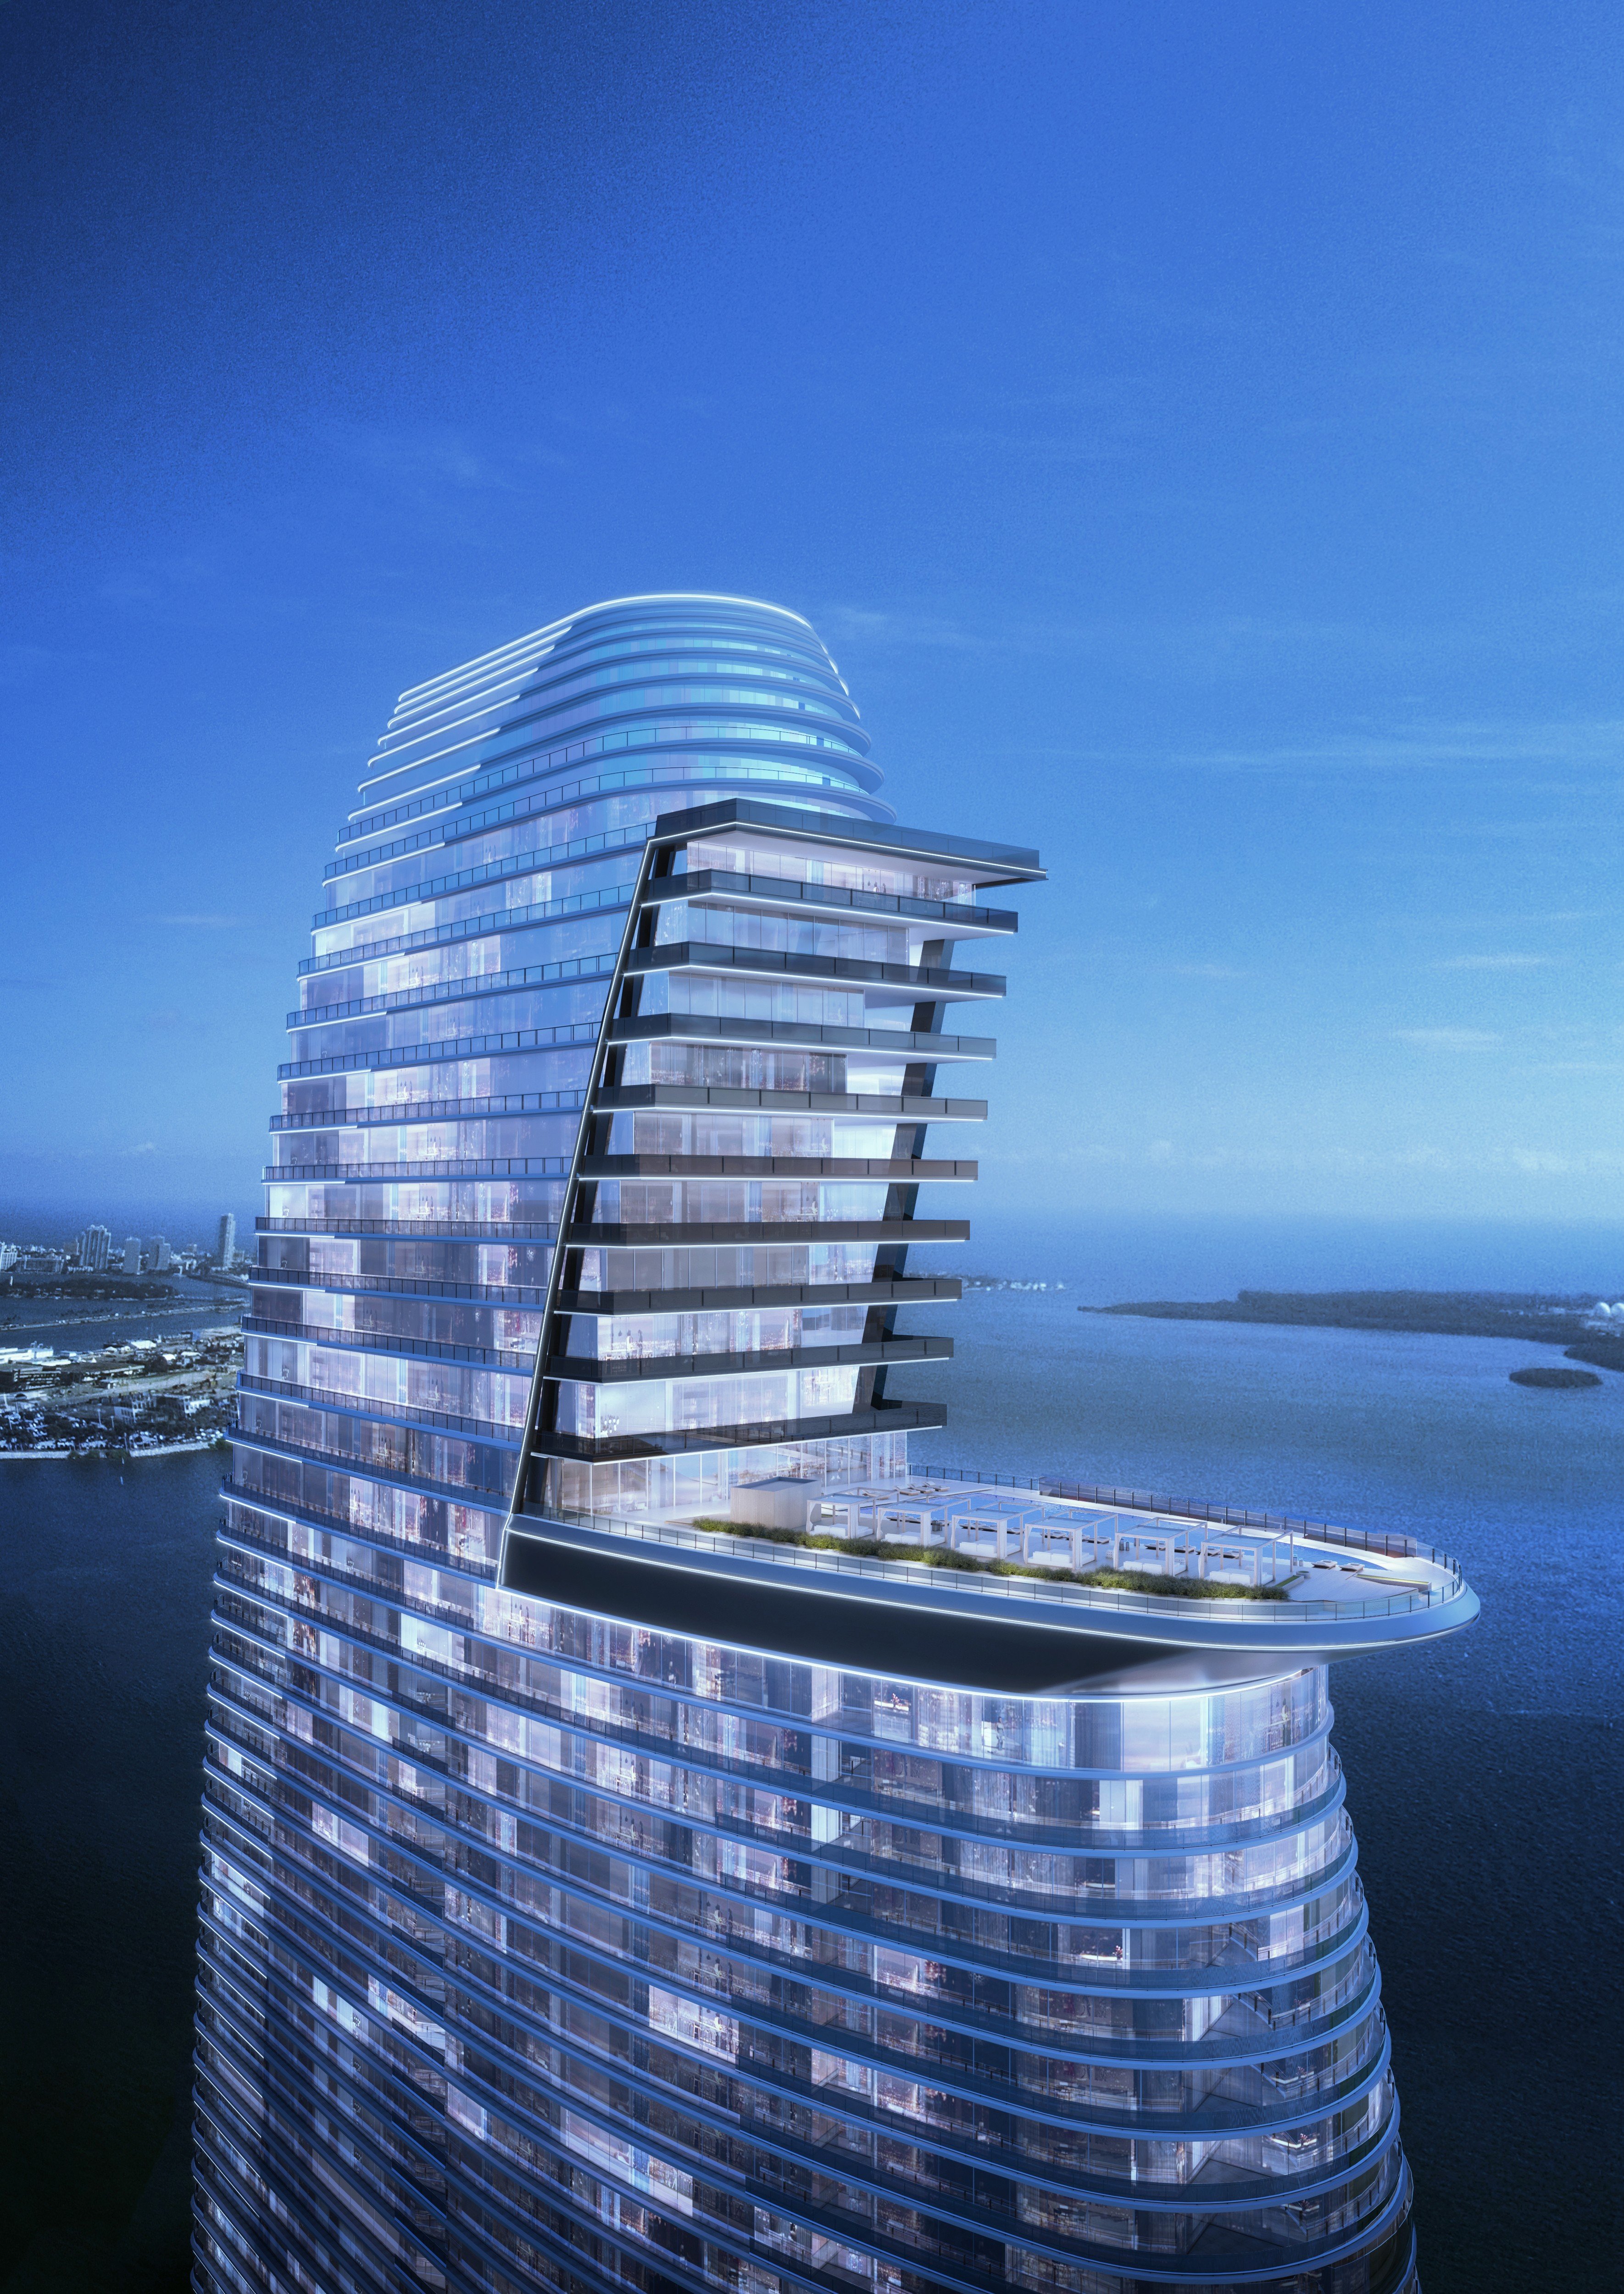 Owners can unwind in the striking curvilinear glass and steel tower made up of 391 luxury condominiums